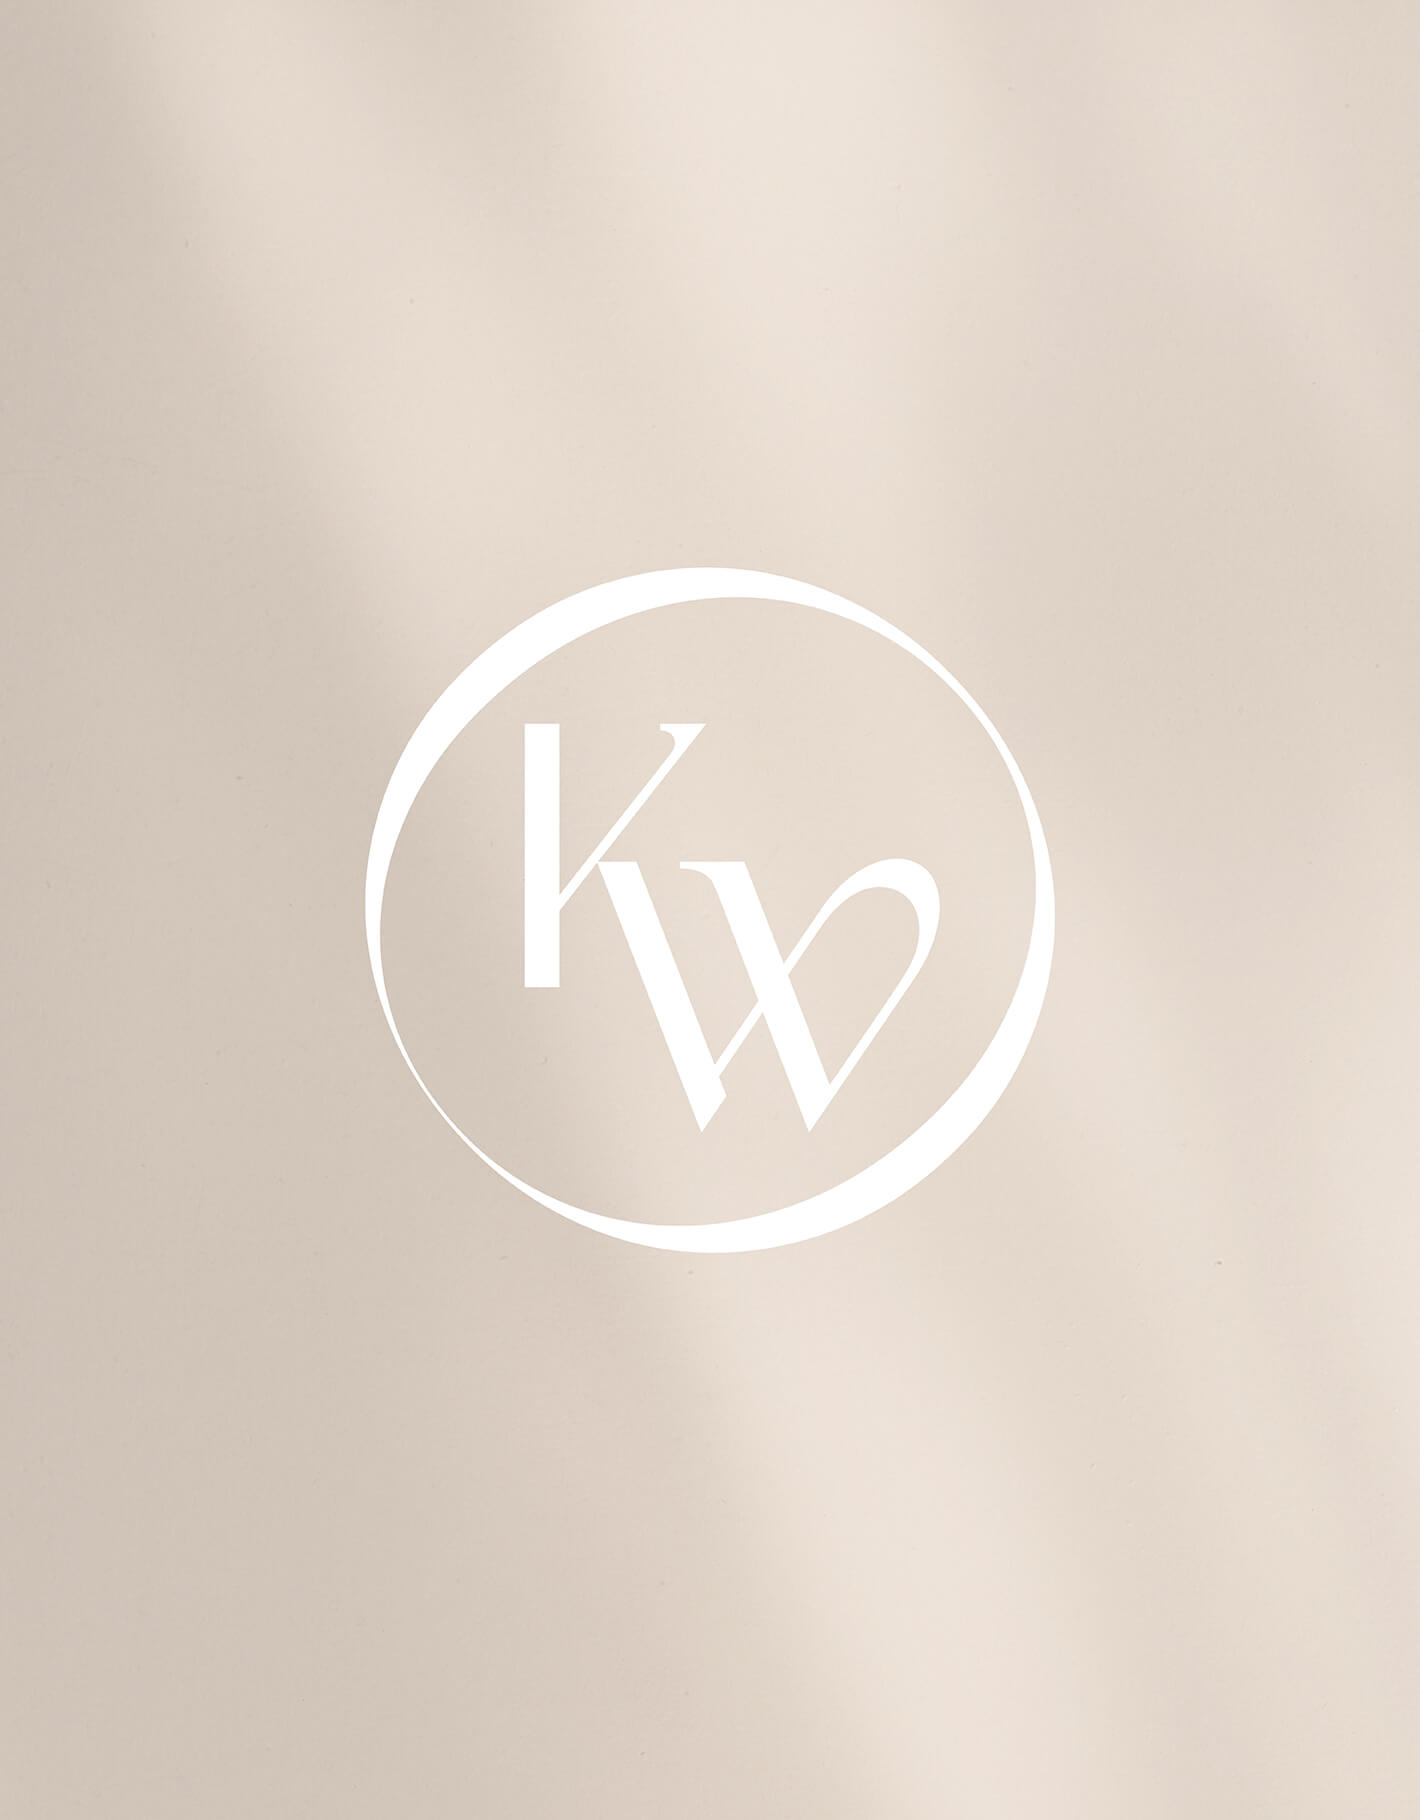 On a pale background sits the custom kelly woodcroft fashion designer brand seal in white